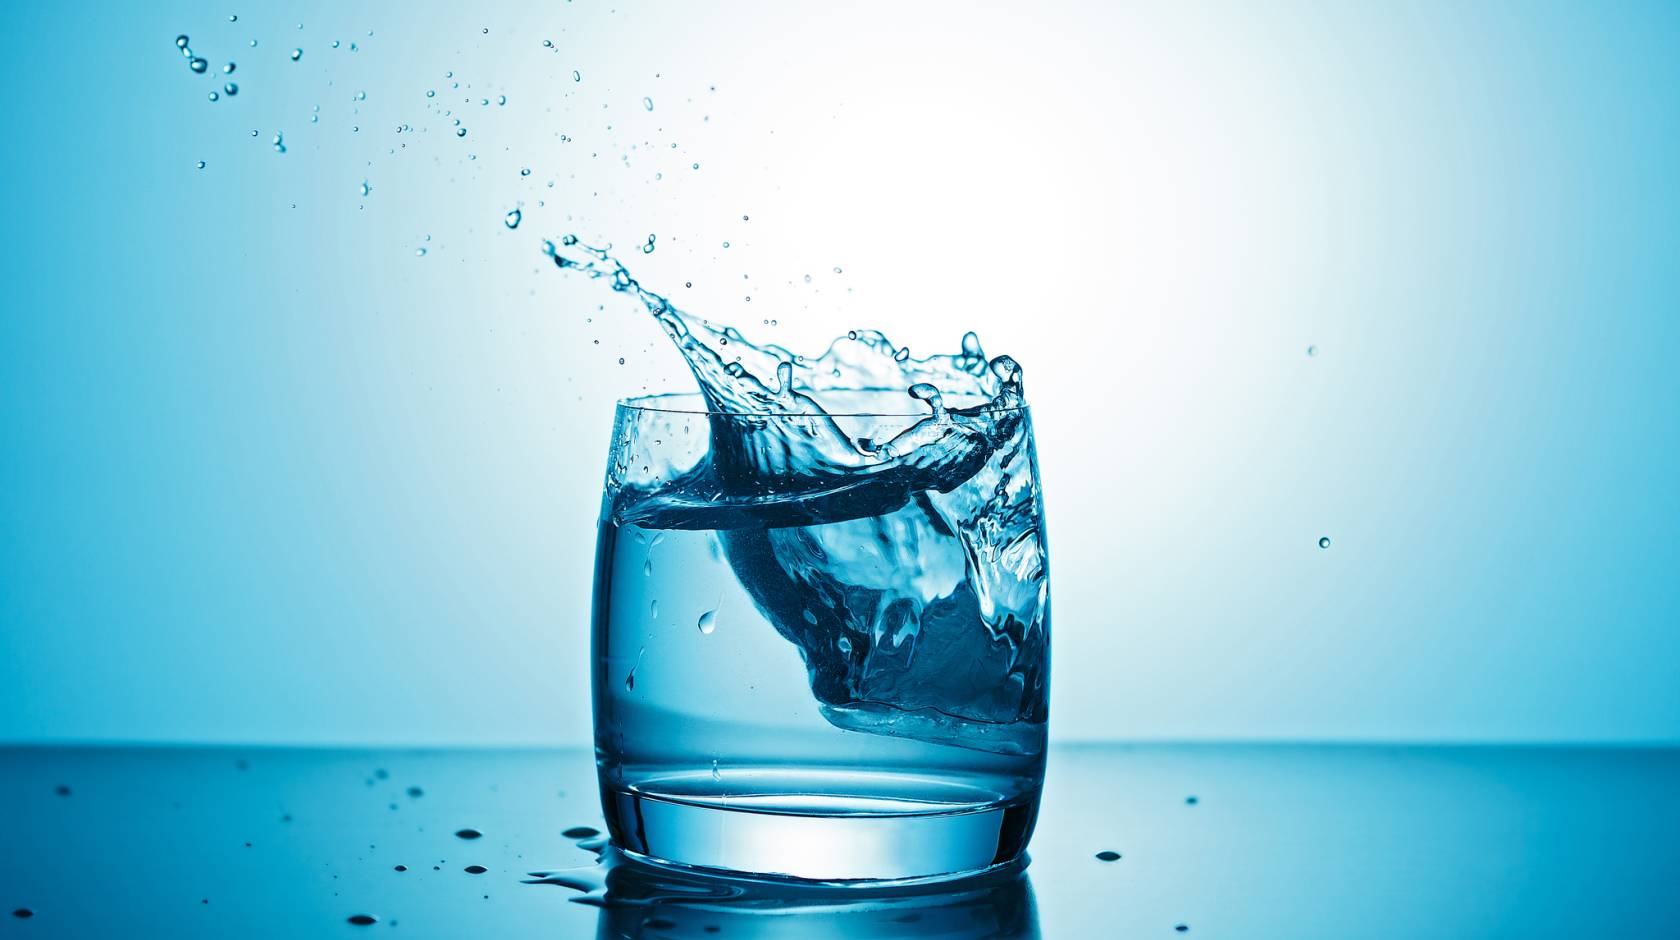 A glass of water with some water splashing out on a blue background